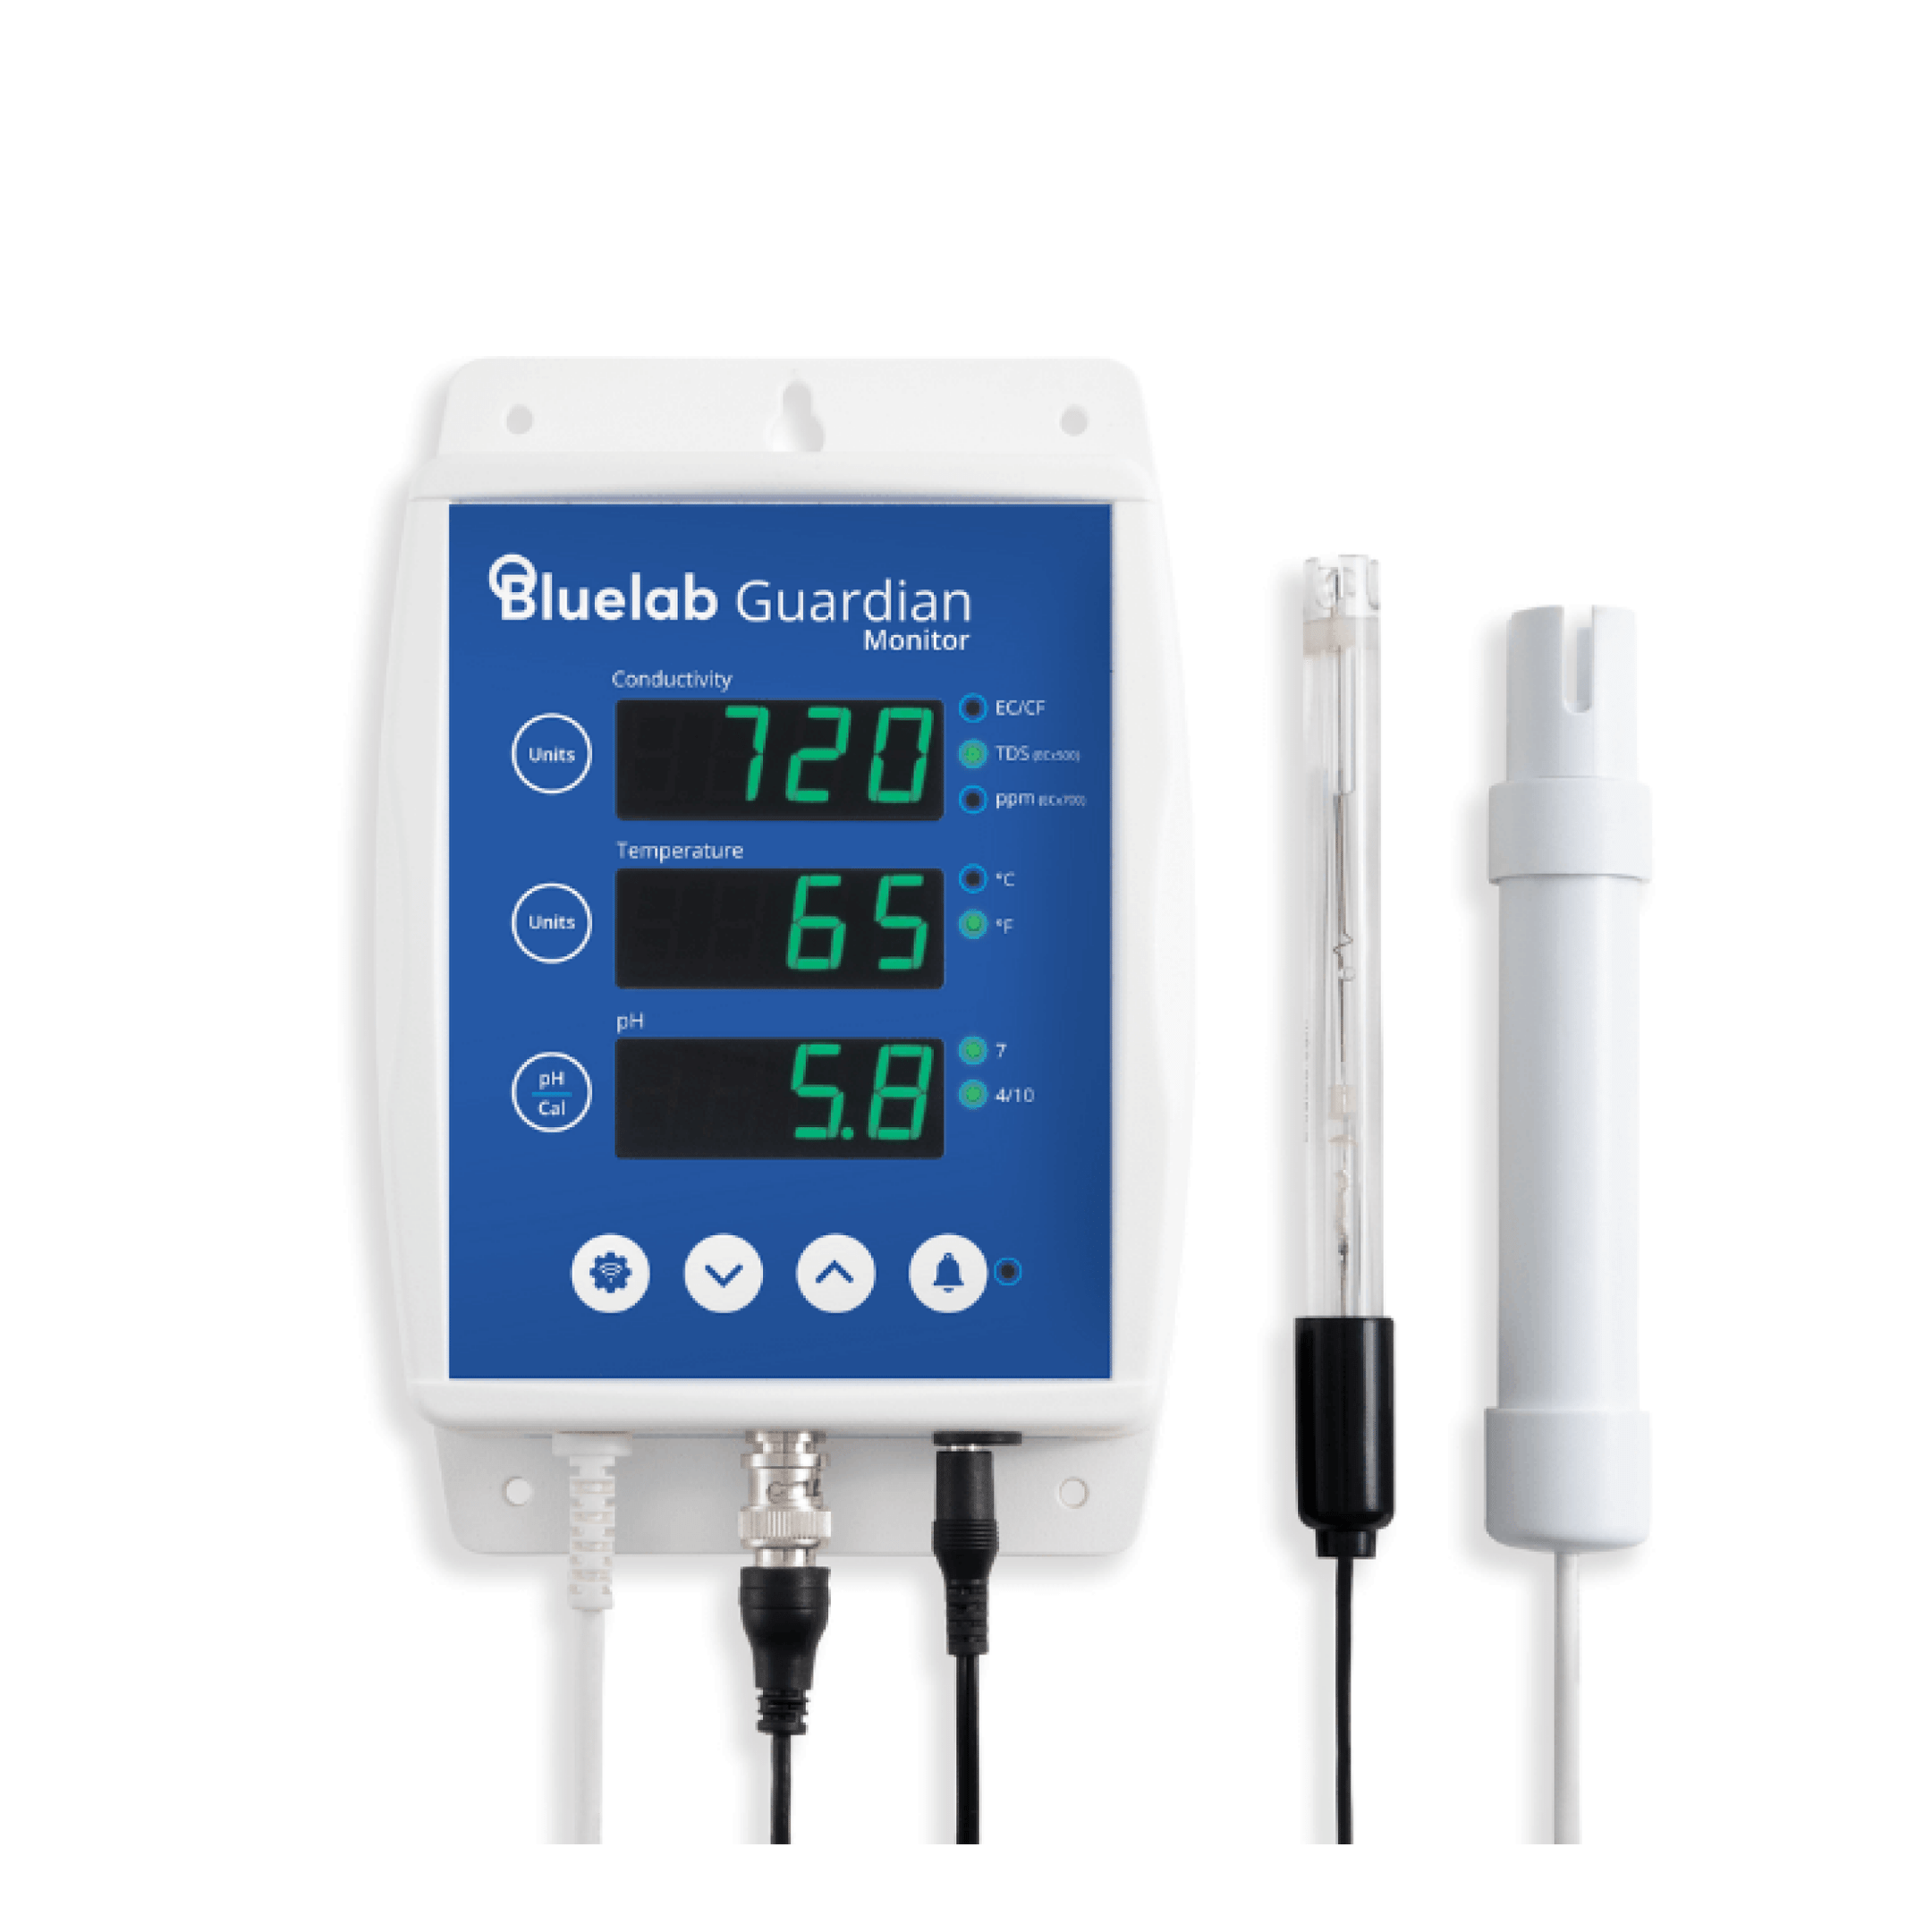 Bluelab Hydroponic Supplies > Water Test Meters & Solutions > EC & pH Meters Bluelab Guardian Wifi Monitor (All In One EC + pH)